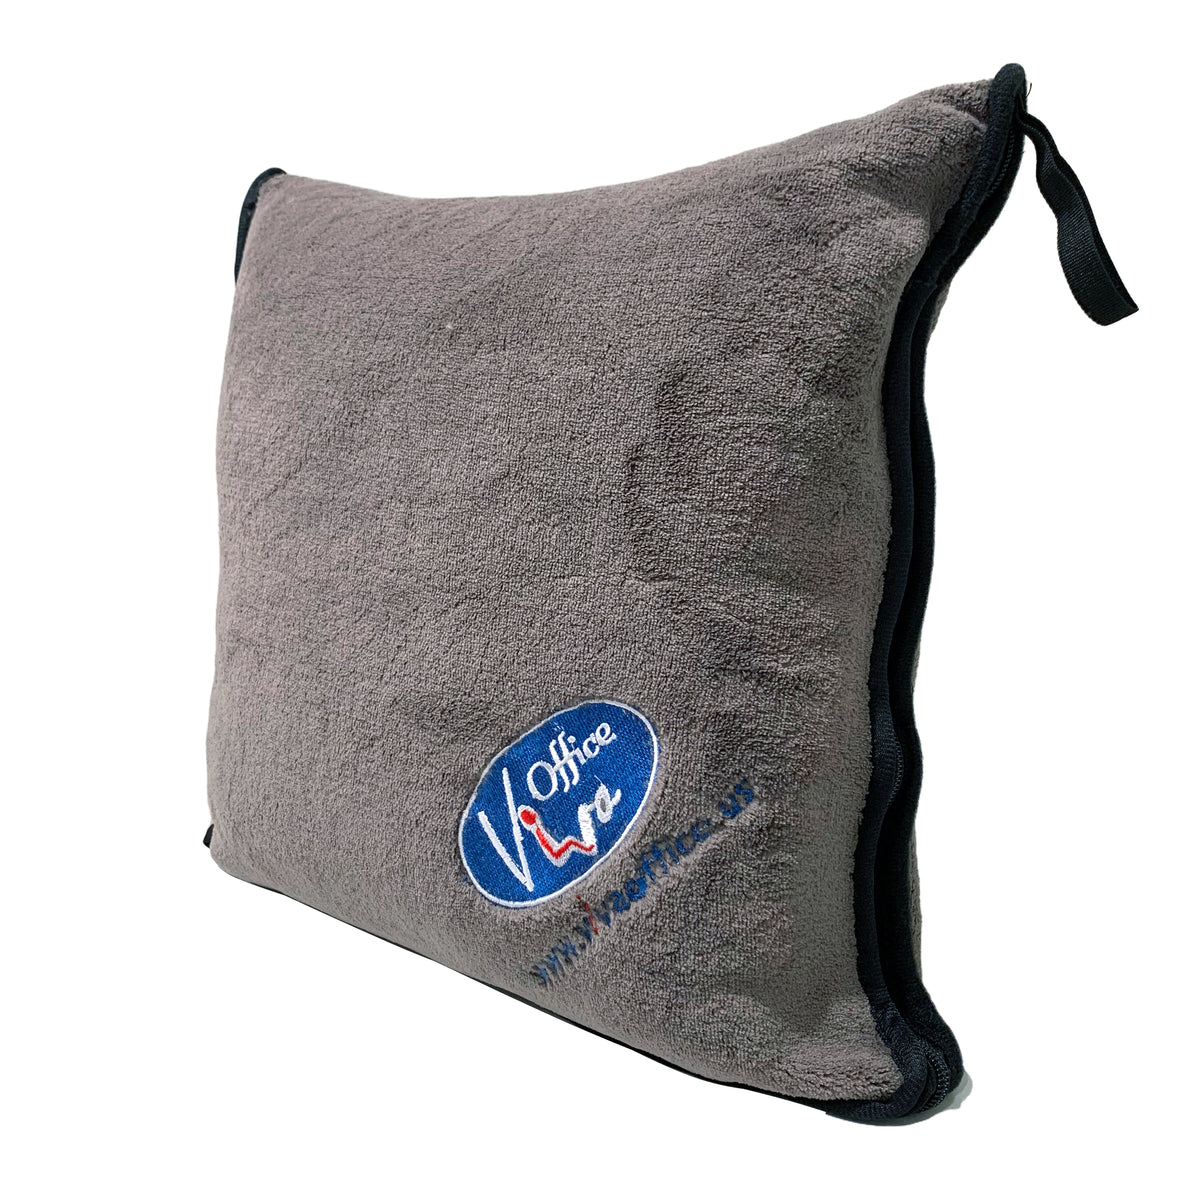 Viva Office US Travel Blanket and Pillow - Premium Plush Soft 2 in 1 Airplane Blanket with Soft Zip Bag Pillowcase